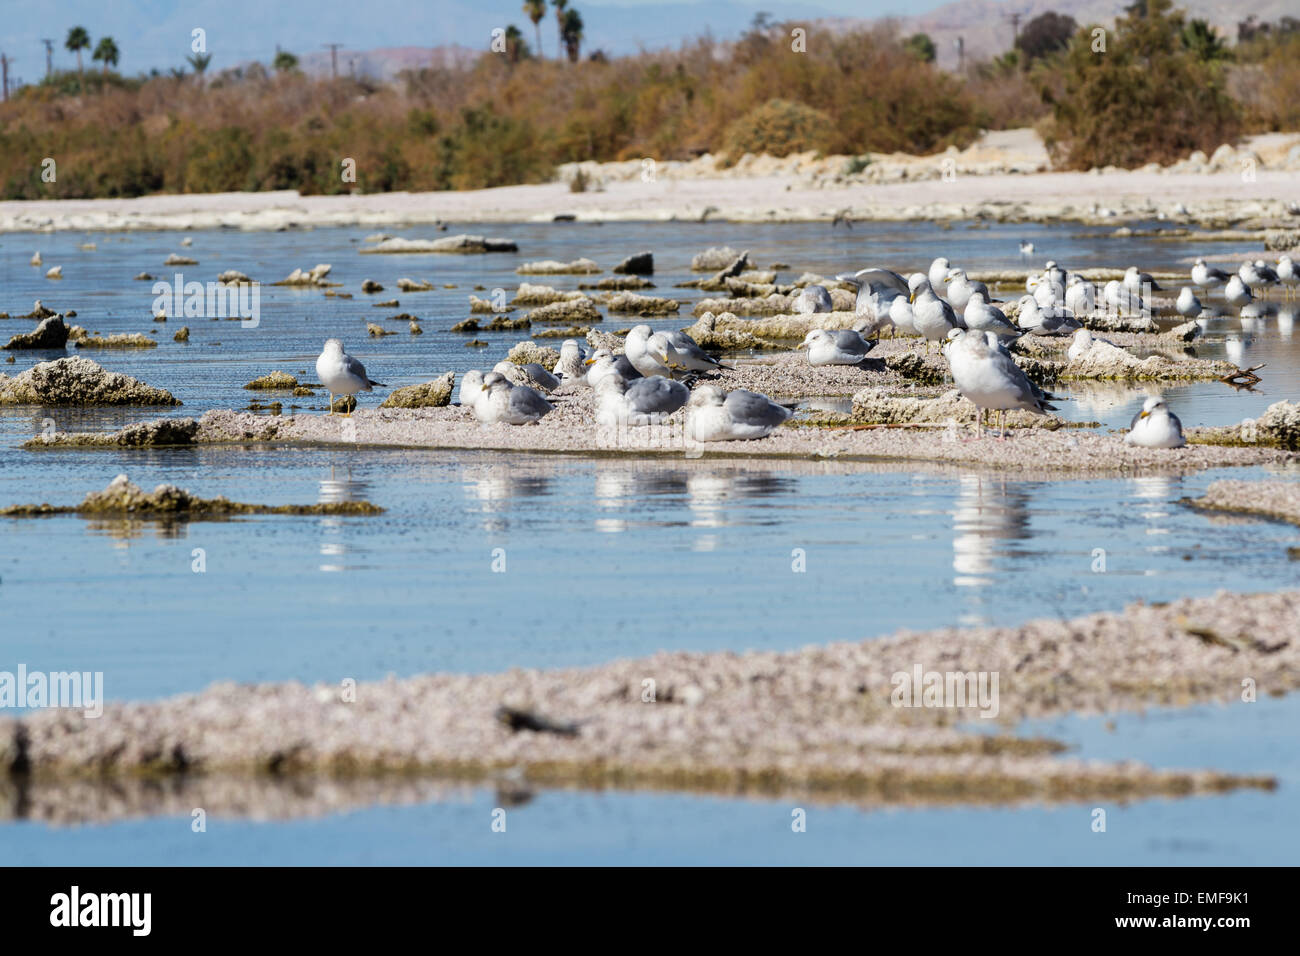 a group of seagulls sitting on the eroding and drying lake bed of the Salton Sea in California Stock Photo